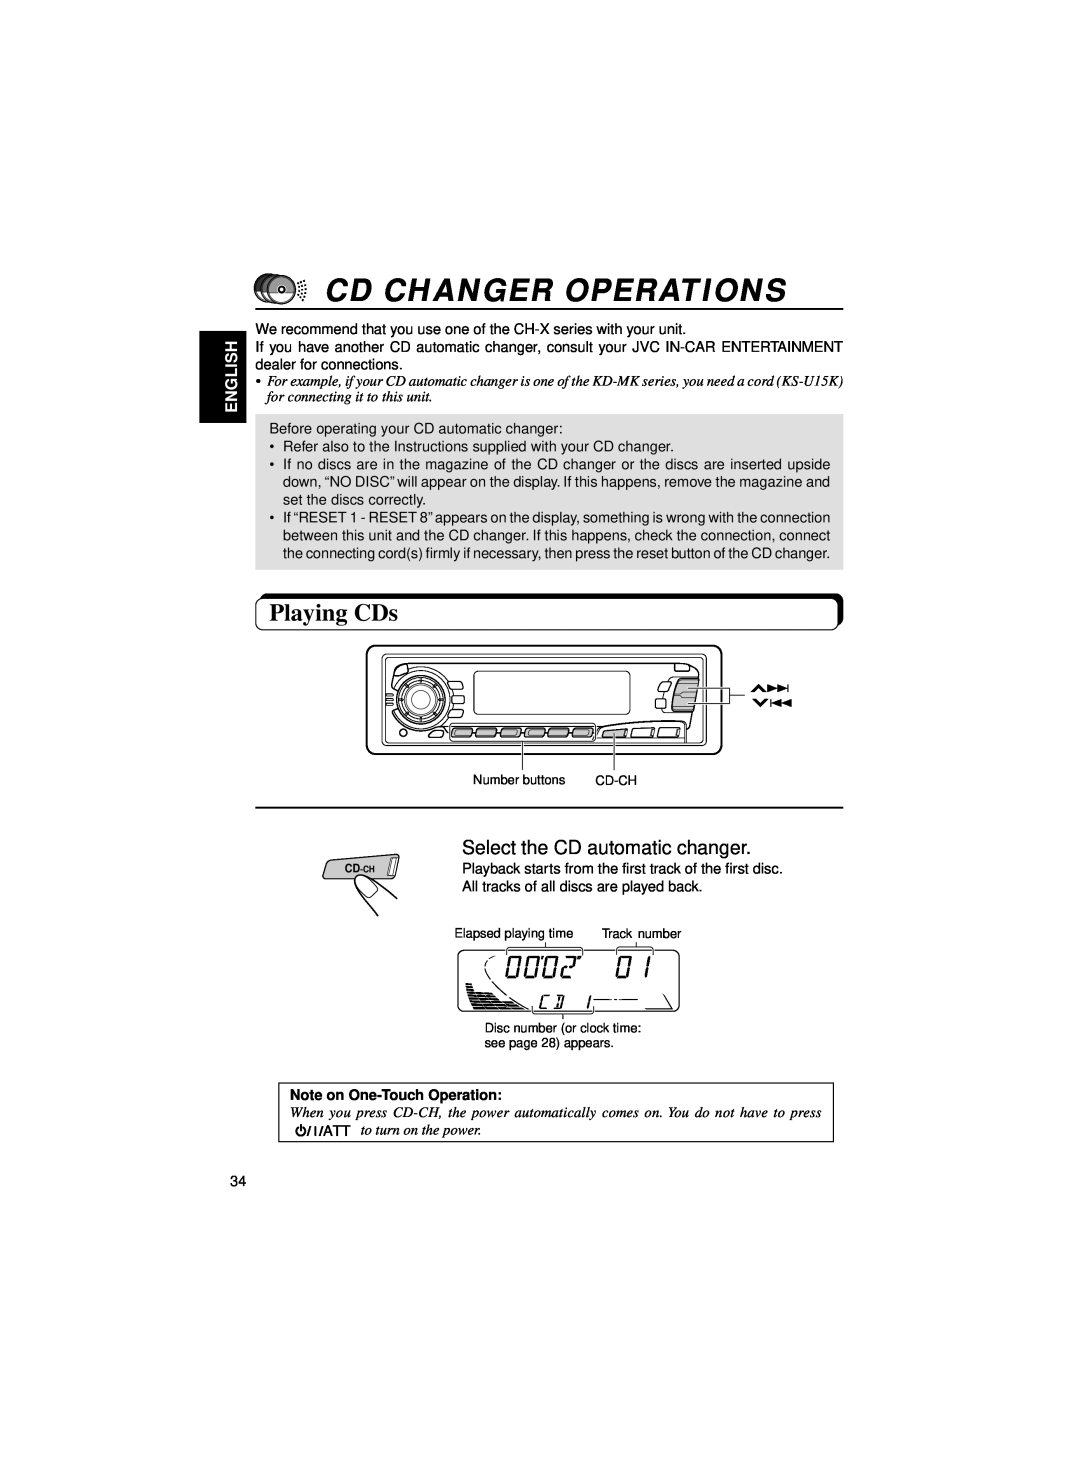 JVC KS-FX834R Cd Changer Operations, Playing CDs, Select the CD automatic changer, English, Note on One-TouchOperation 